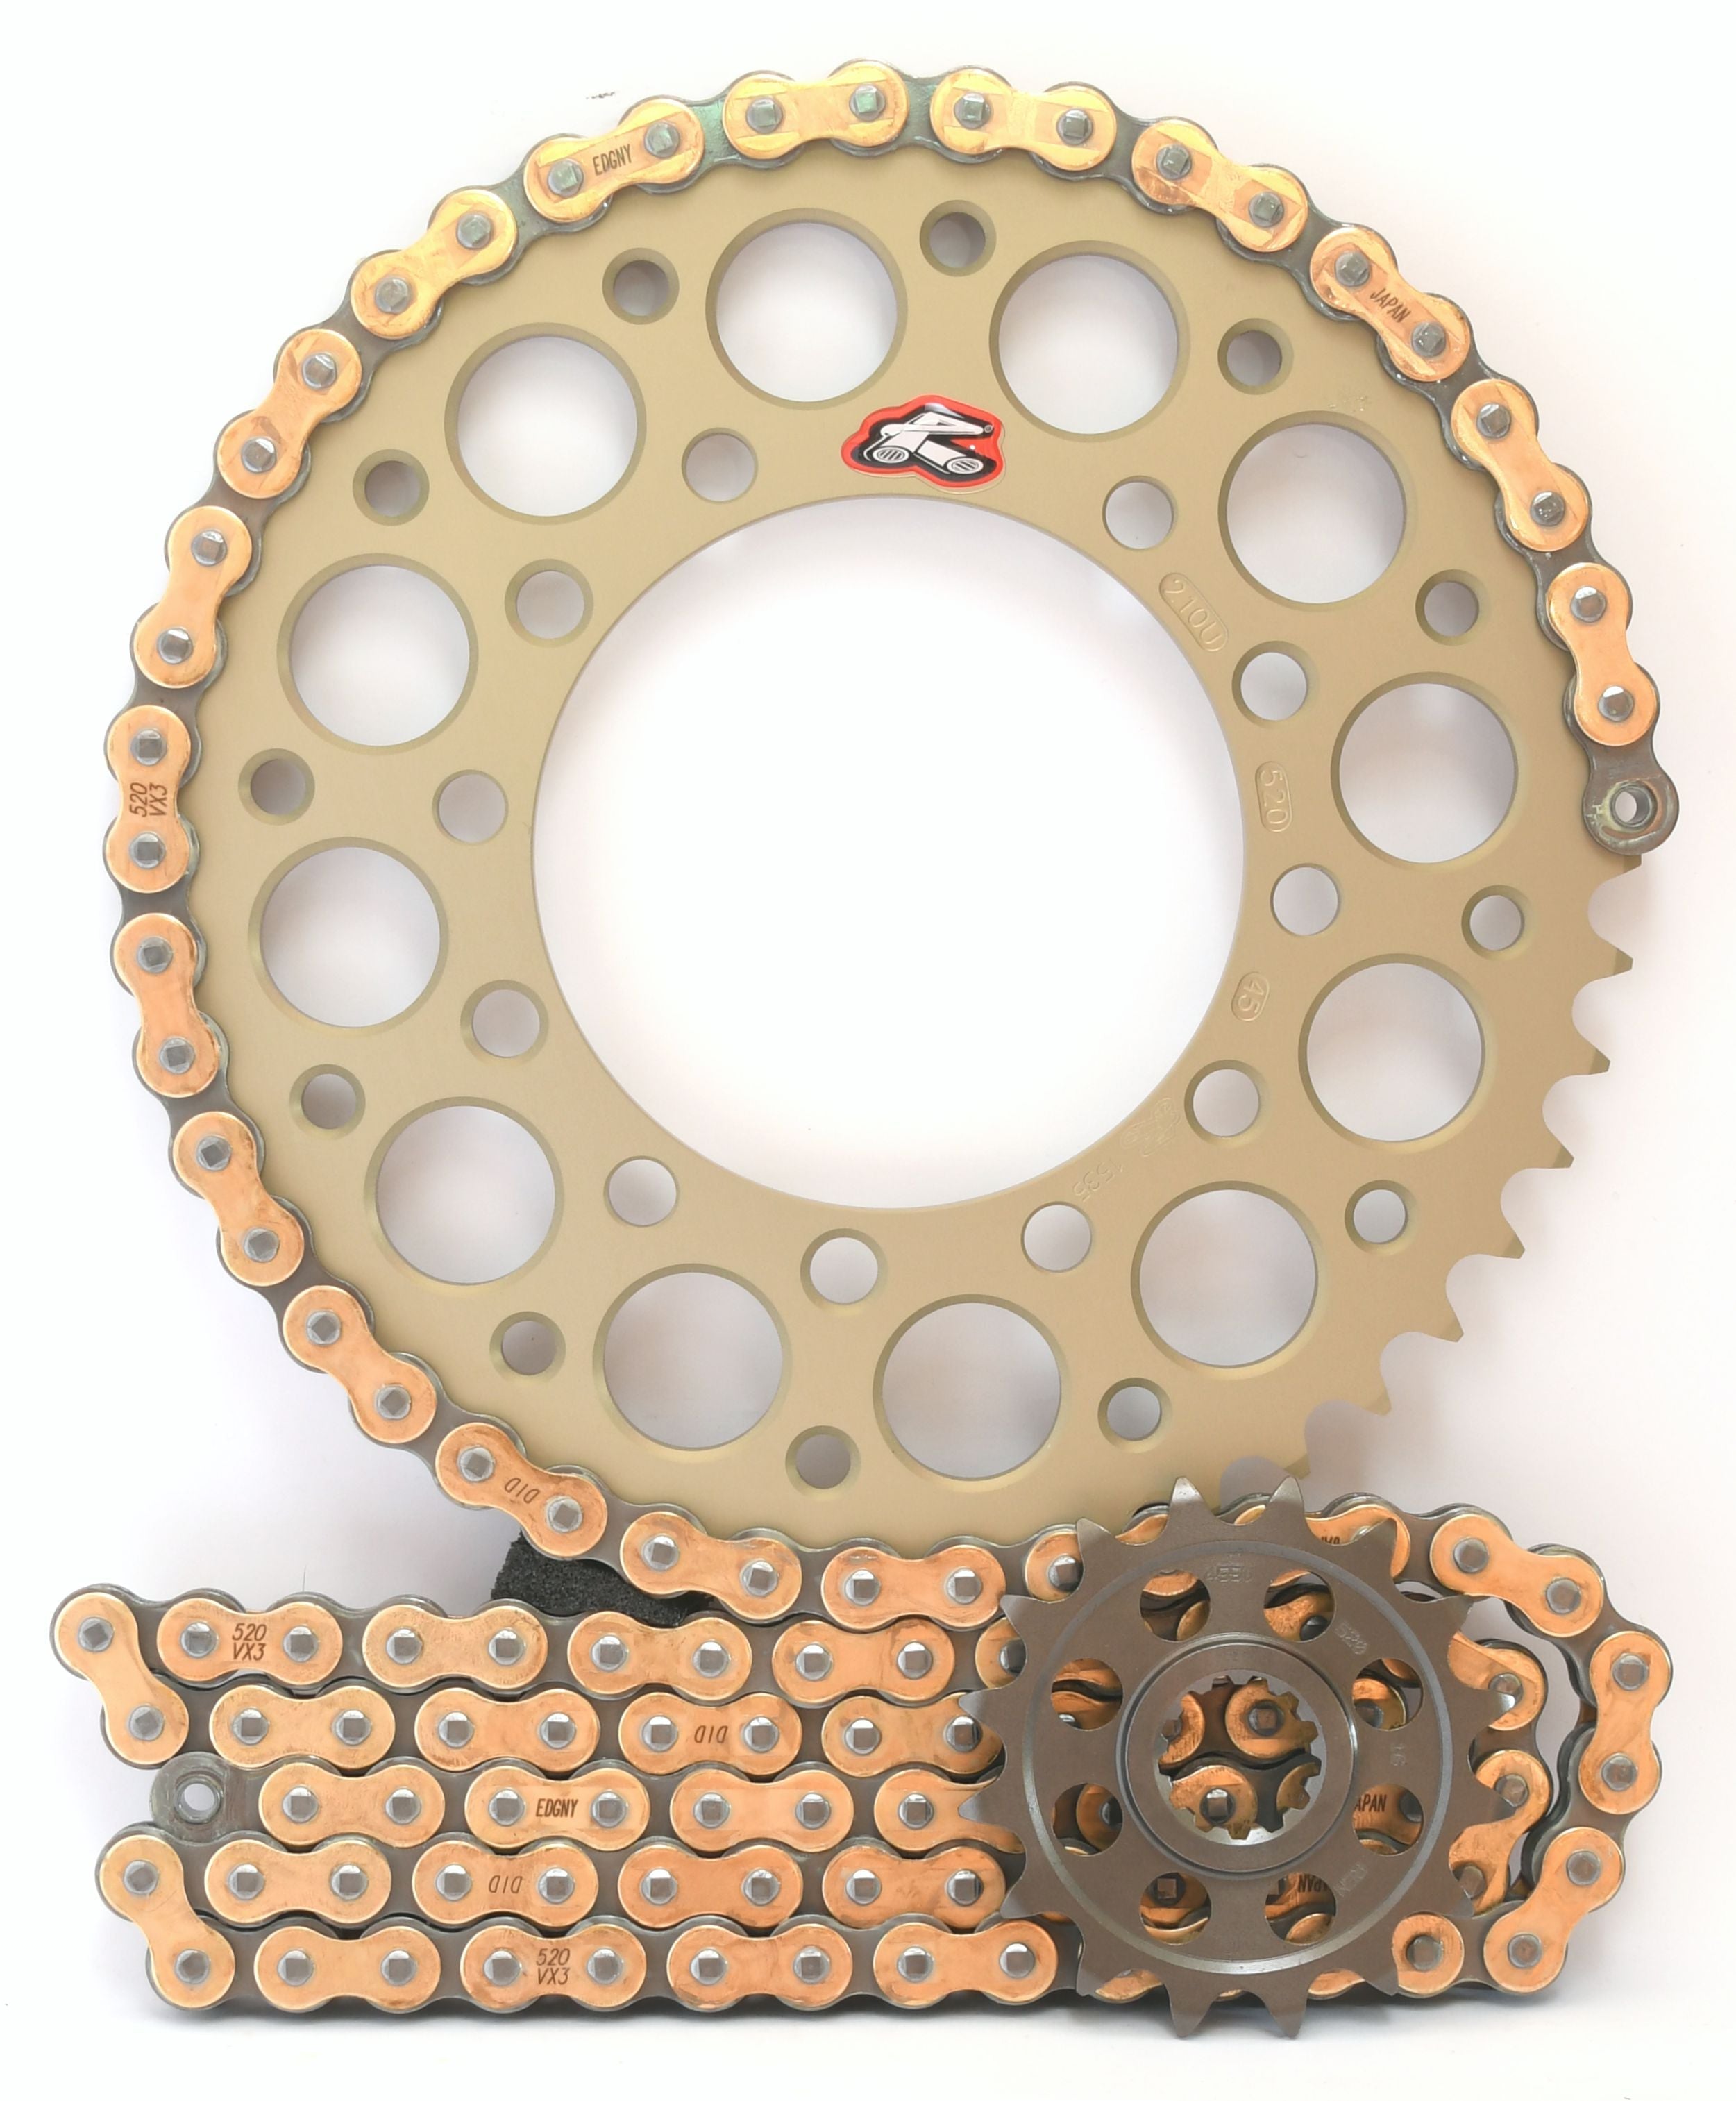 Renthal Ultralight and DID 520 Conversion Chain & Sprocket Kit for Yamaha YZF R1 2004-2005 - Standard Gearing